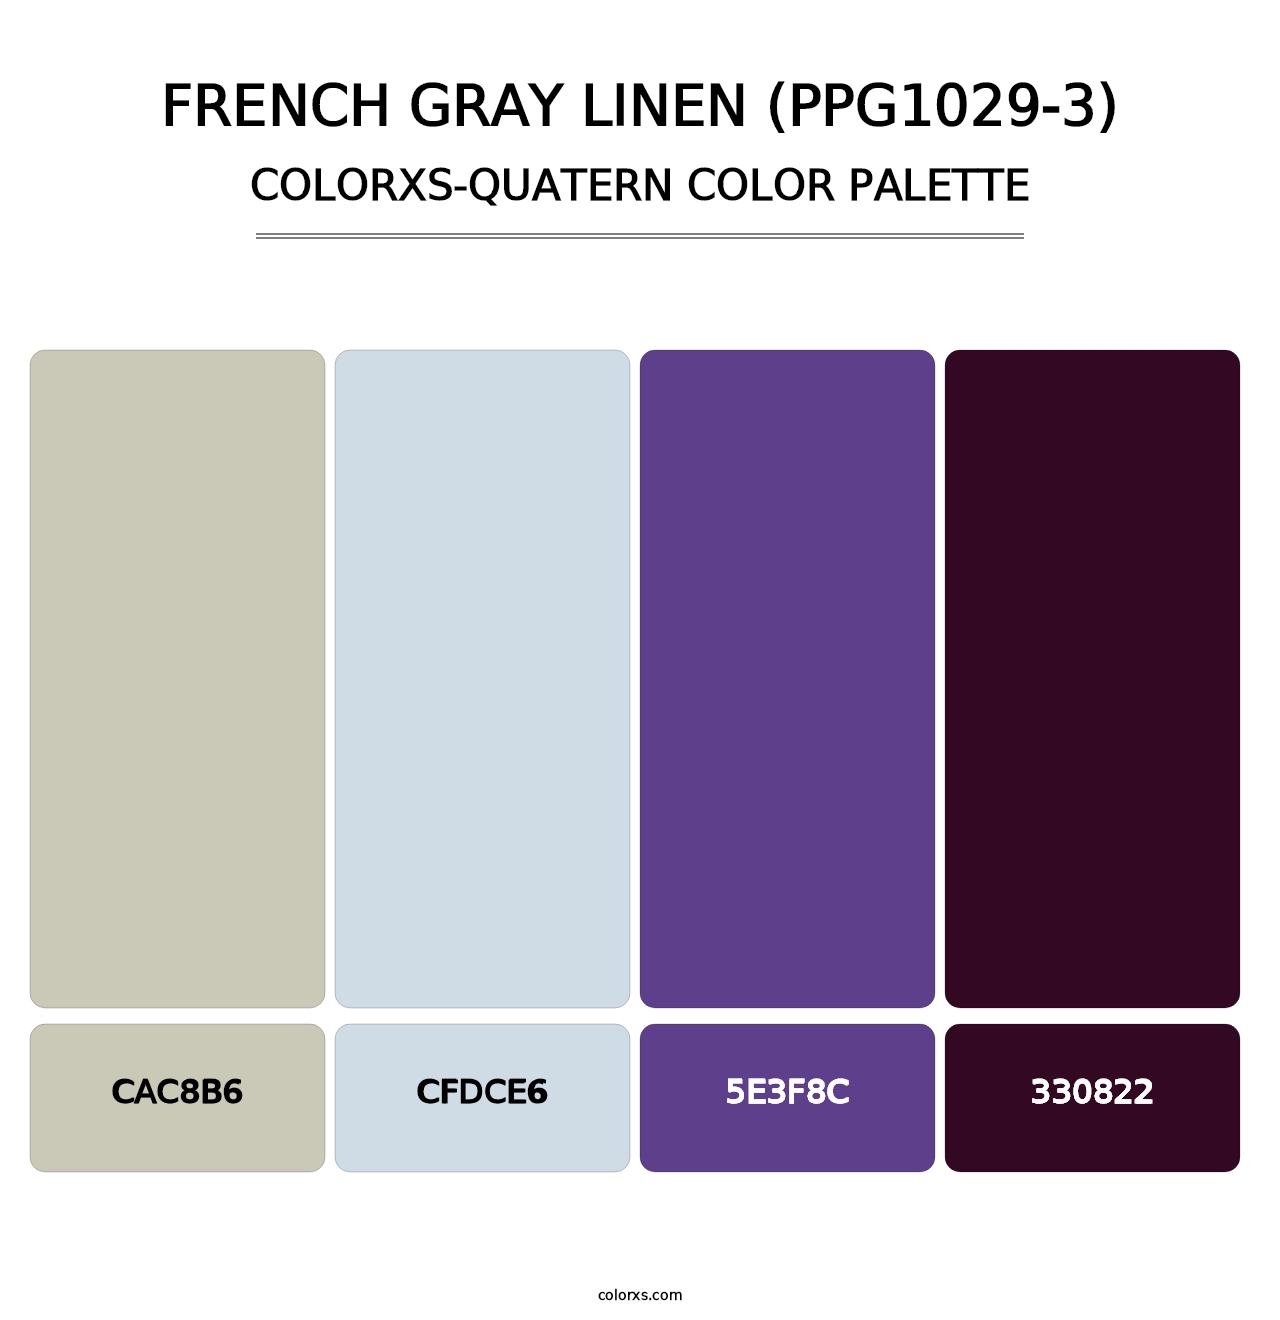 French Gray Linen (PPG1029-3) - Colorxs Quatern Palette